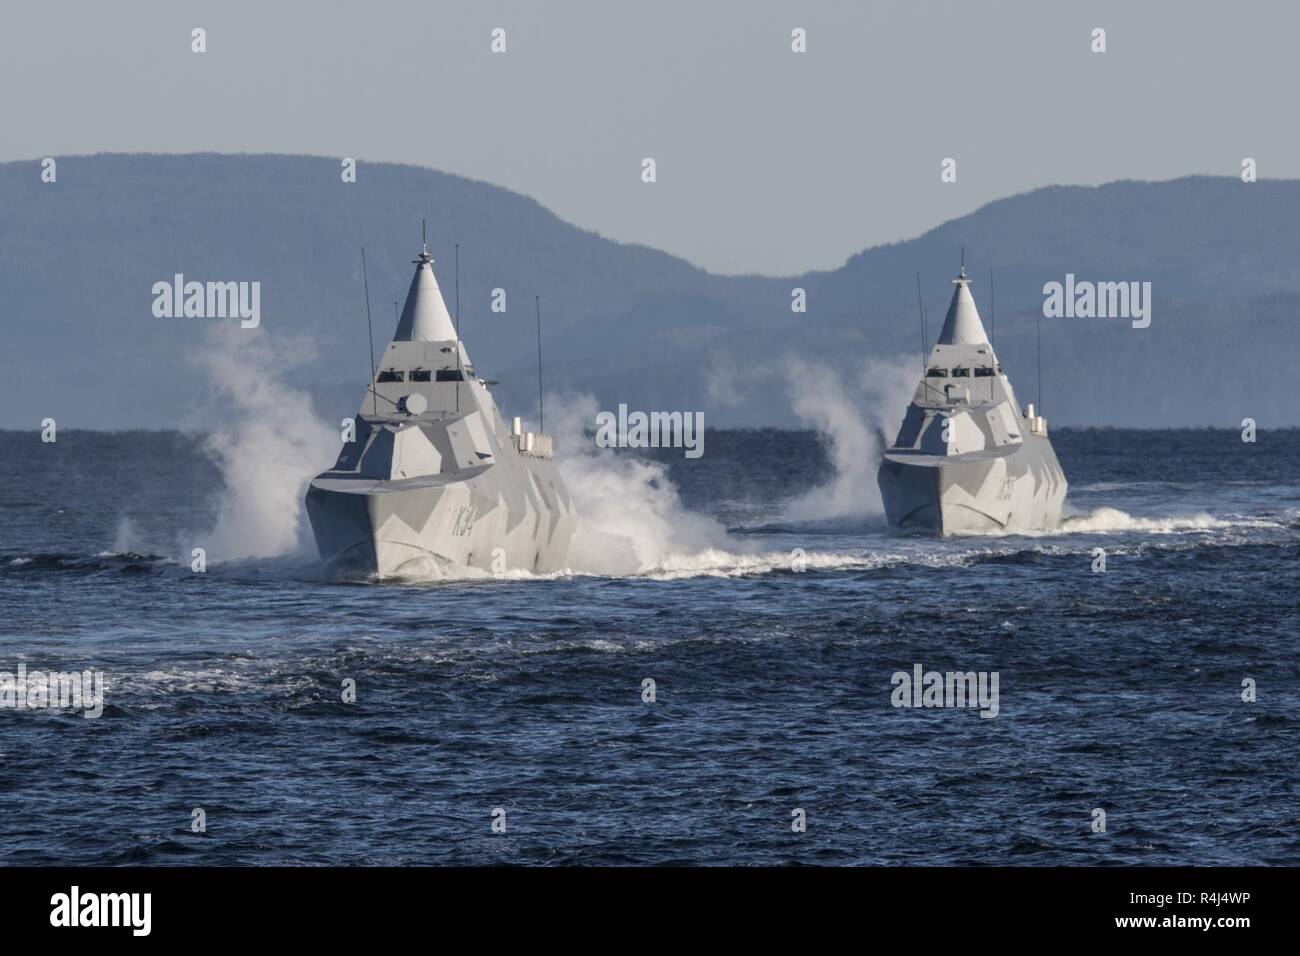 His Swedish Majesty’s Ships NYKOPING and KARLSTAD sail through The Trondheim Fjord during Exercise TRIDENT JUNCTURE on October 26, 2018.    With around 50,000 personnel participating in Trident Juncture 2018, it is one of the largest NATO exercises in recent years. Around 250 aircraft, 65 vessels and more than 10,000 vehicles are involved in the exercise in Norway. Stock Photo